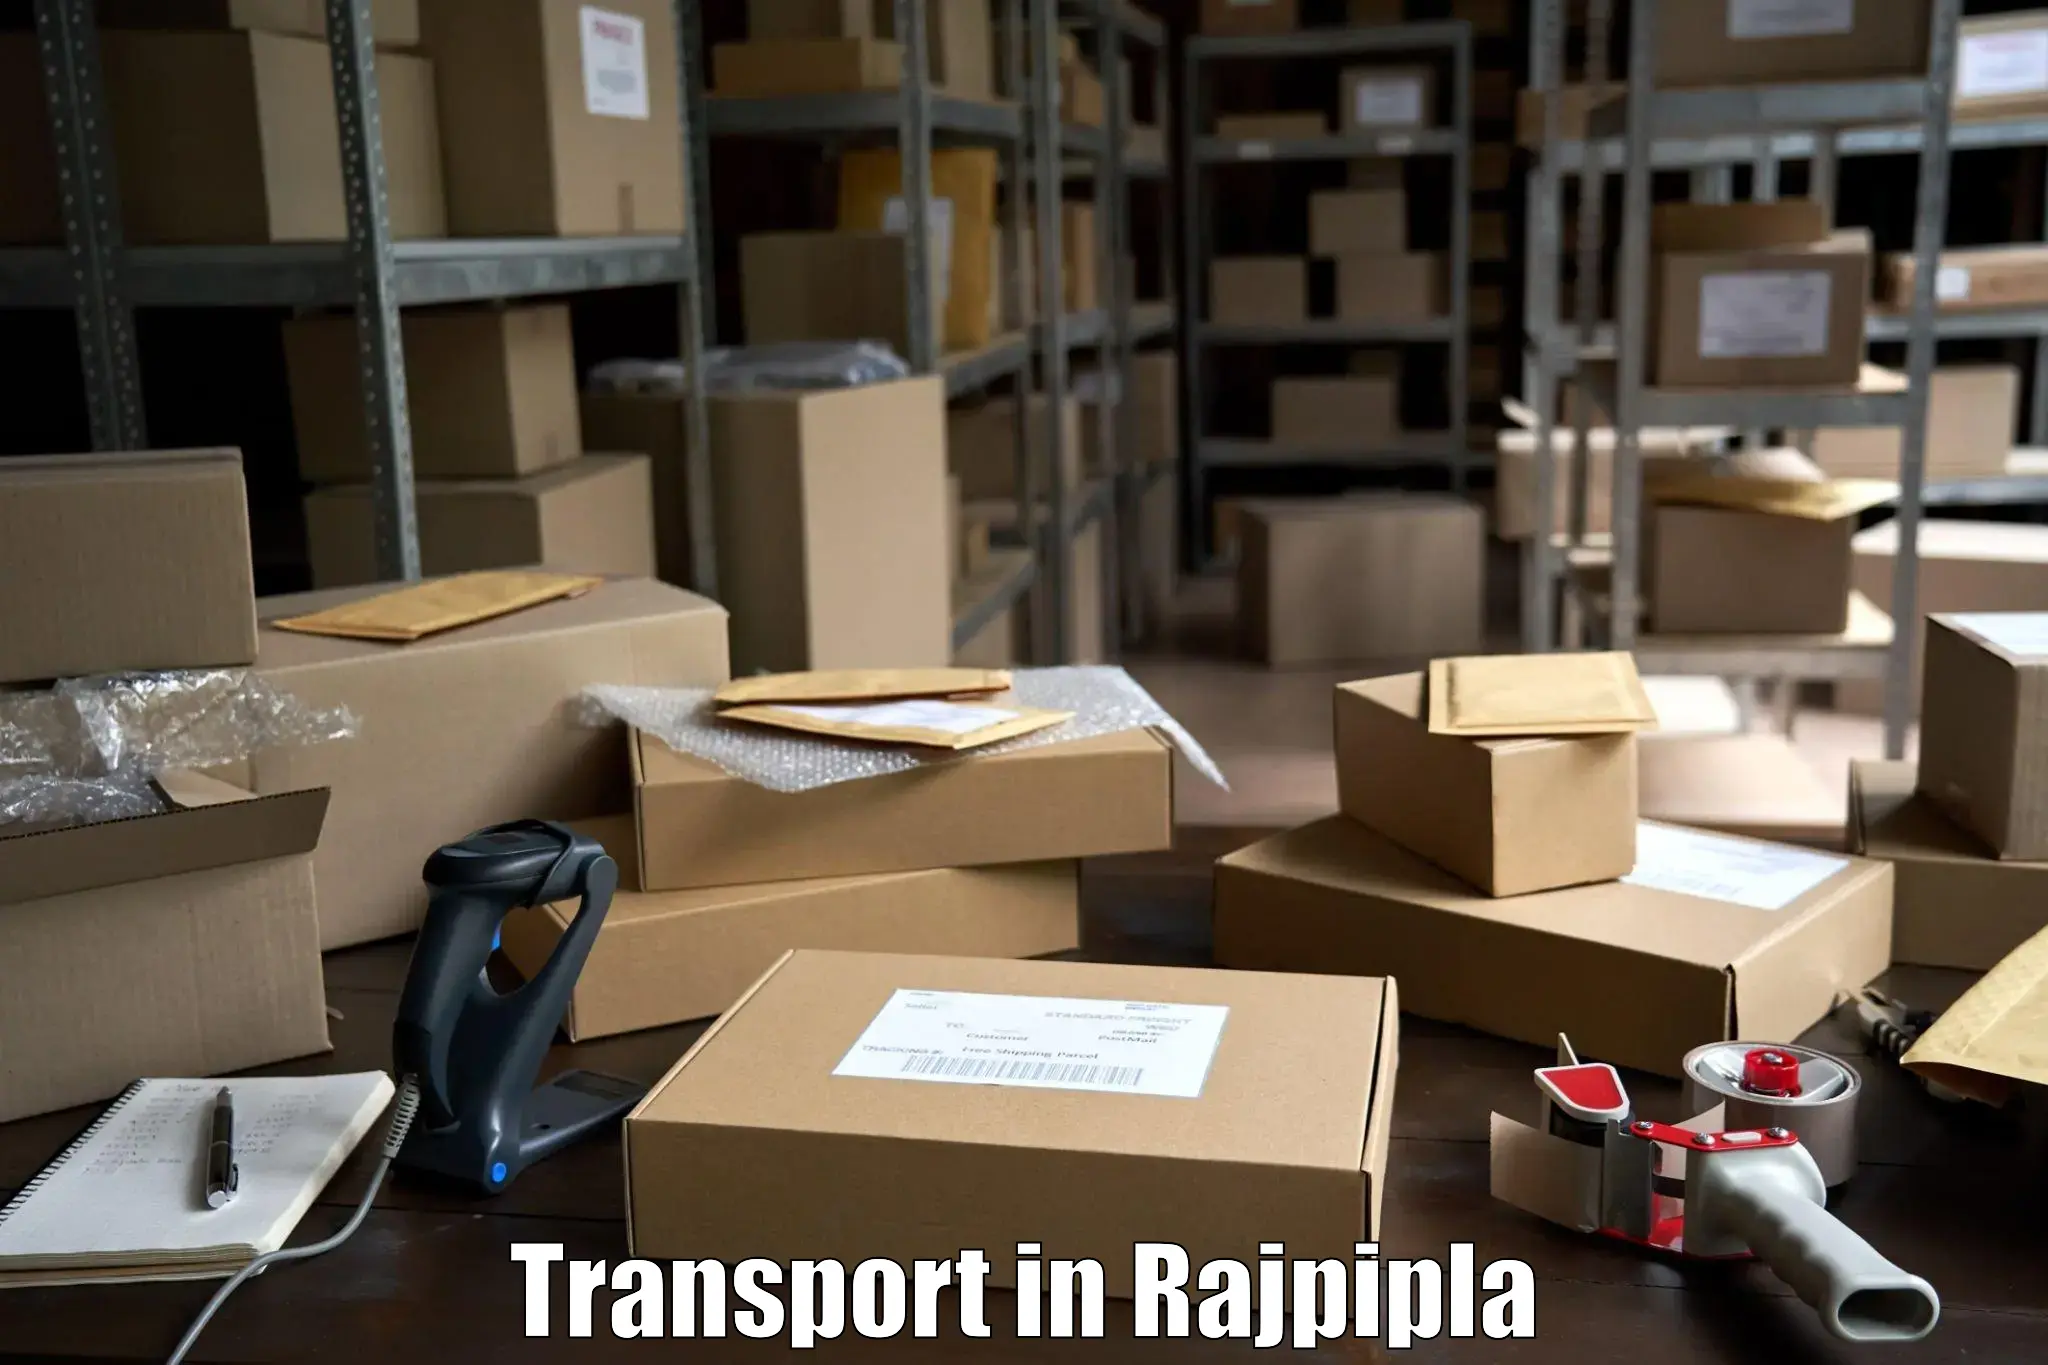 Luggage transport services in Rajpipla